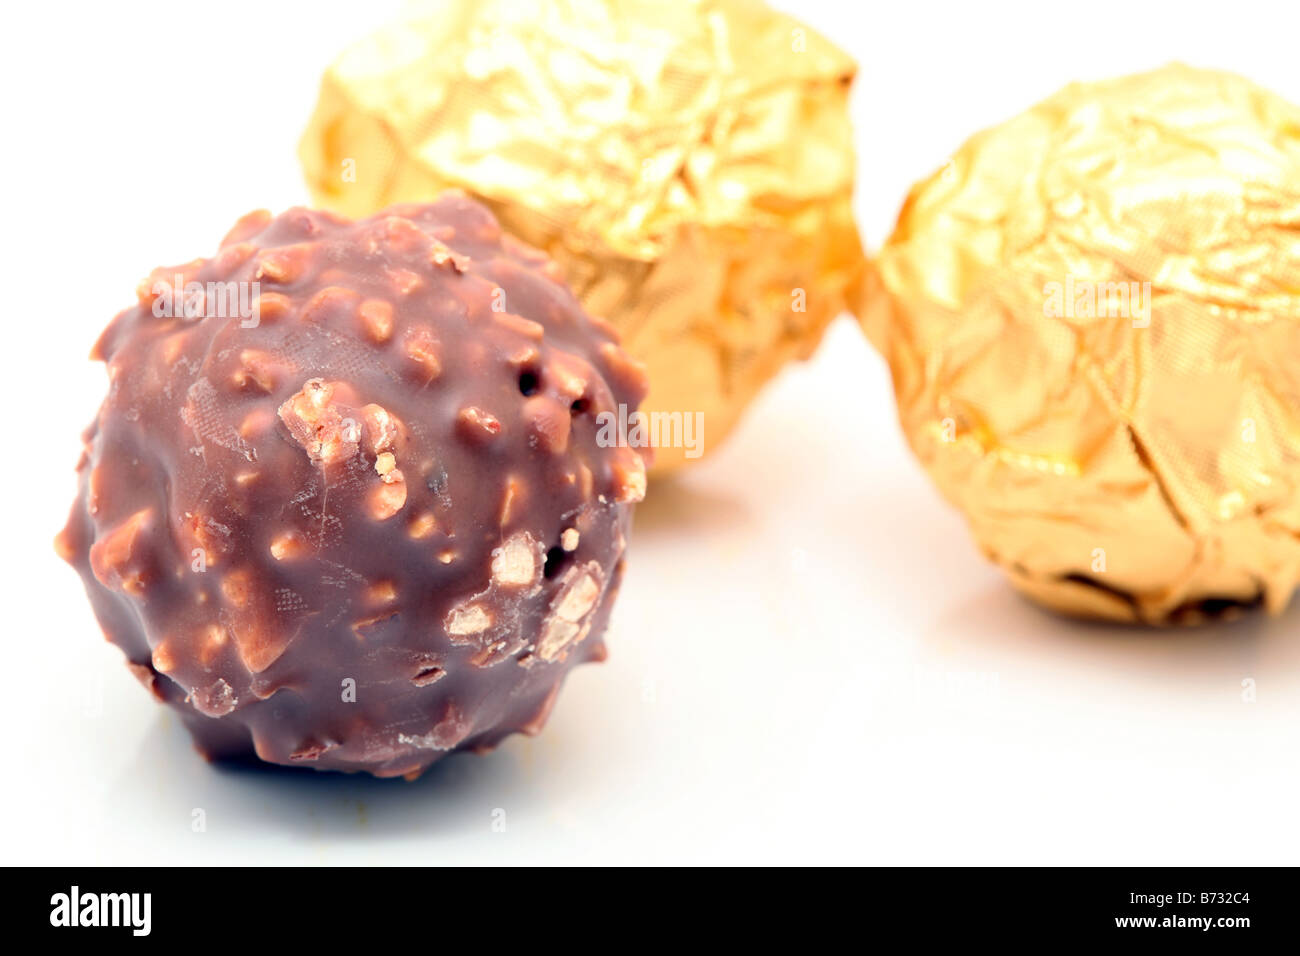 closeup chocolate sphere with nuts with gold wraped defocus background Stock Photo